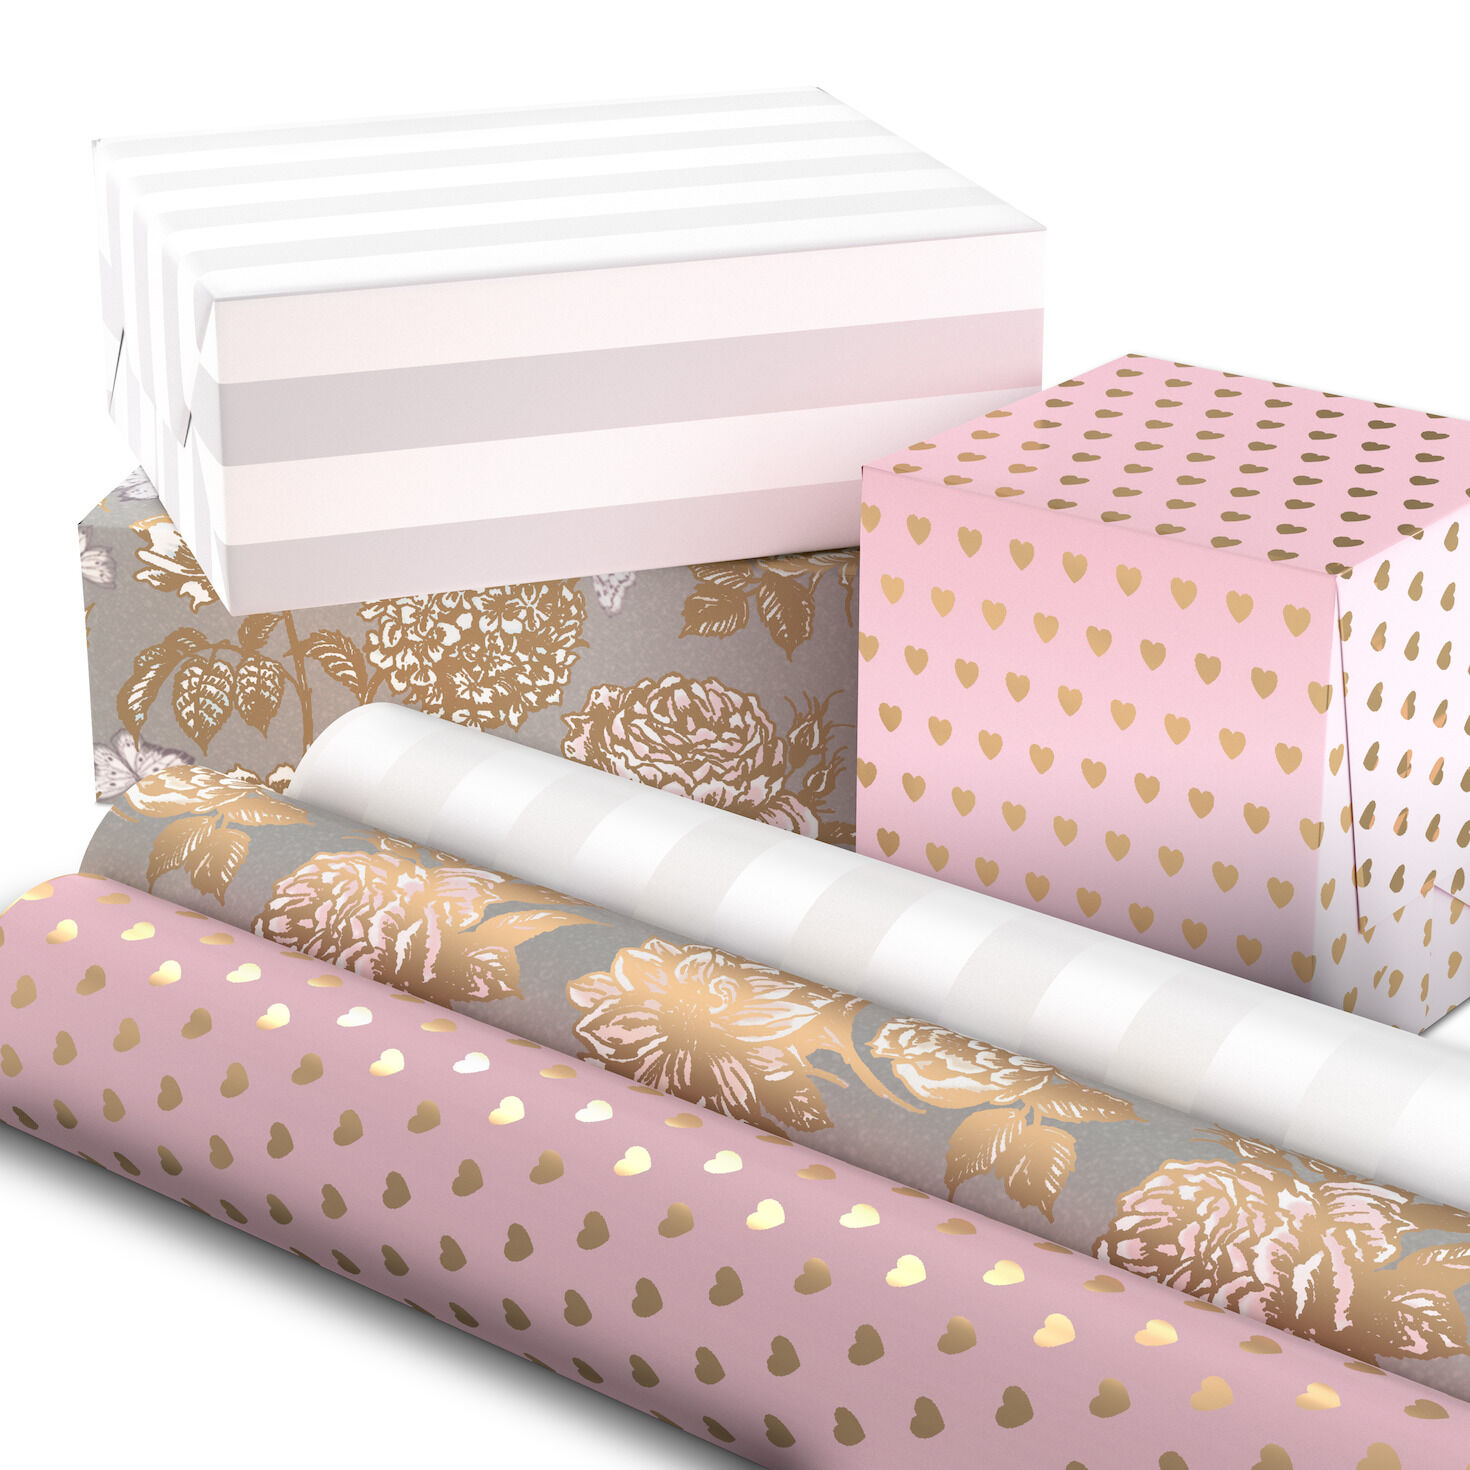 Pink and Gray 3-Pack Wrapping Paper, 85 sq. ft. total for only USD 19.99 | Hallmark